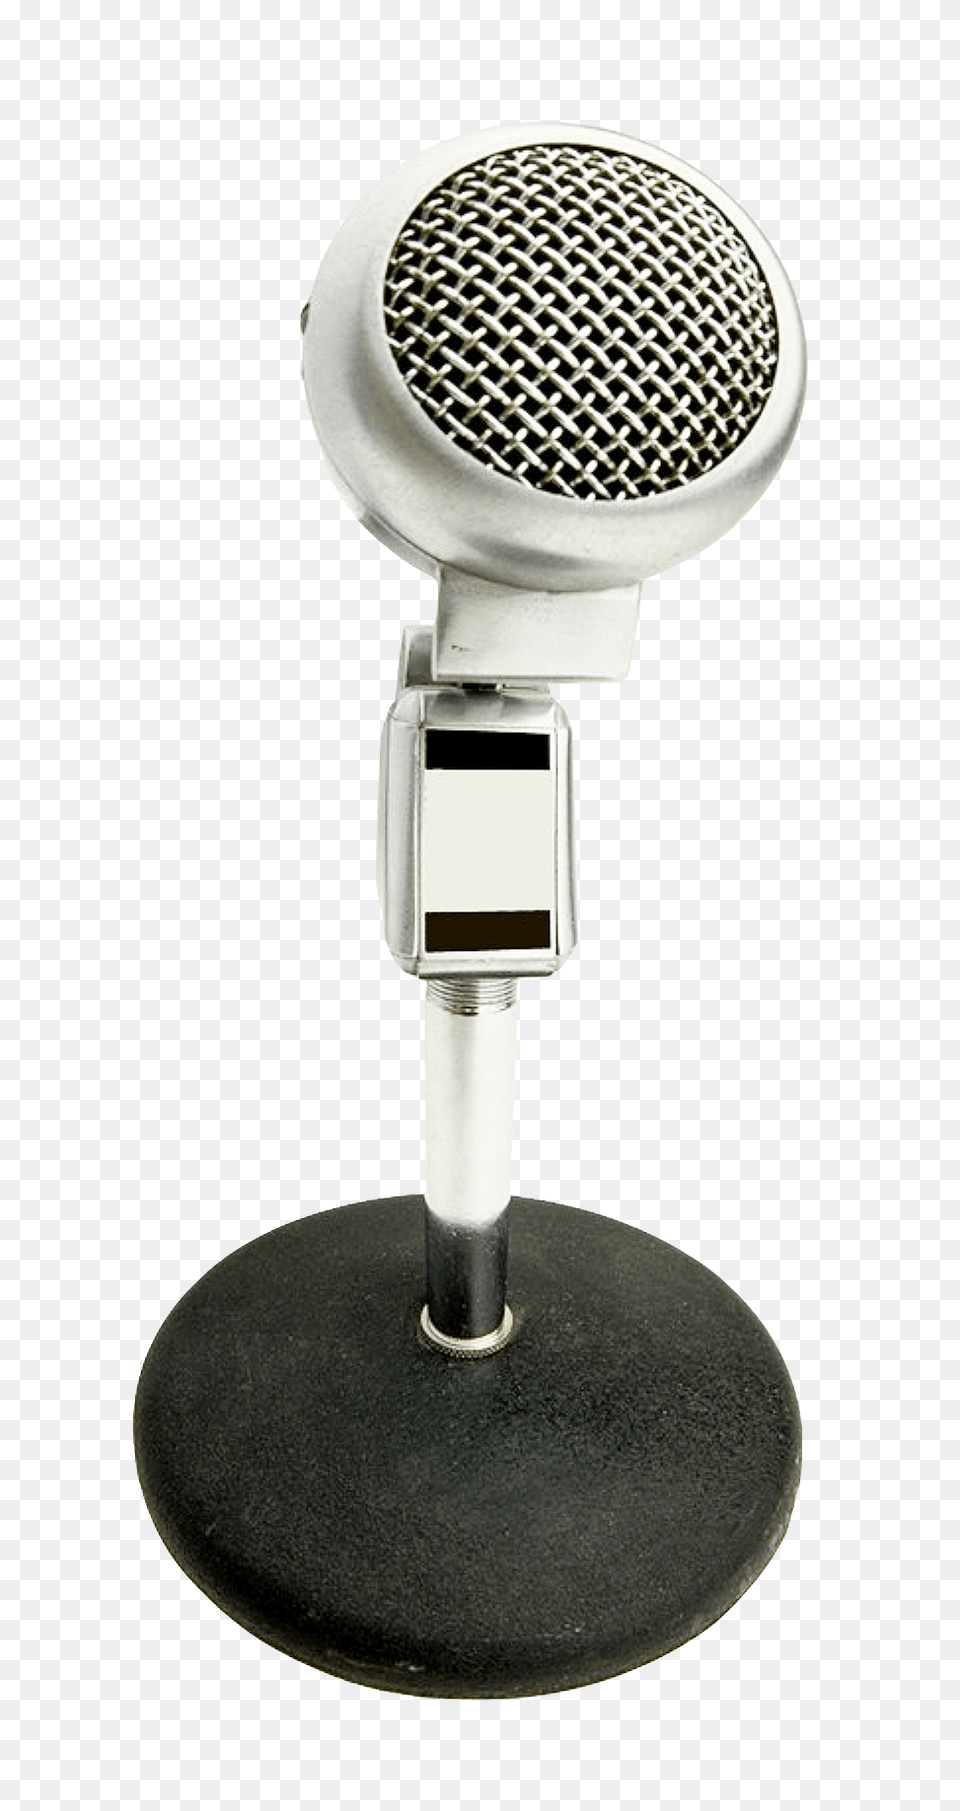 Pngpix Com Microphone Image, Electrical Device, Smoke Pipe Png